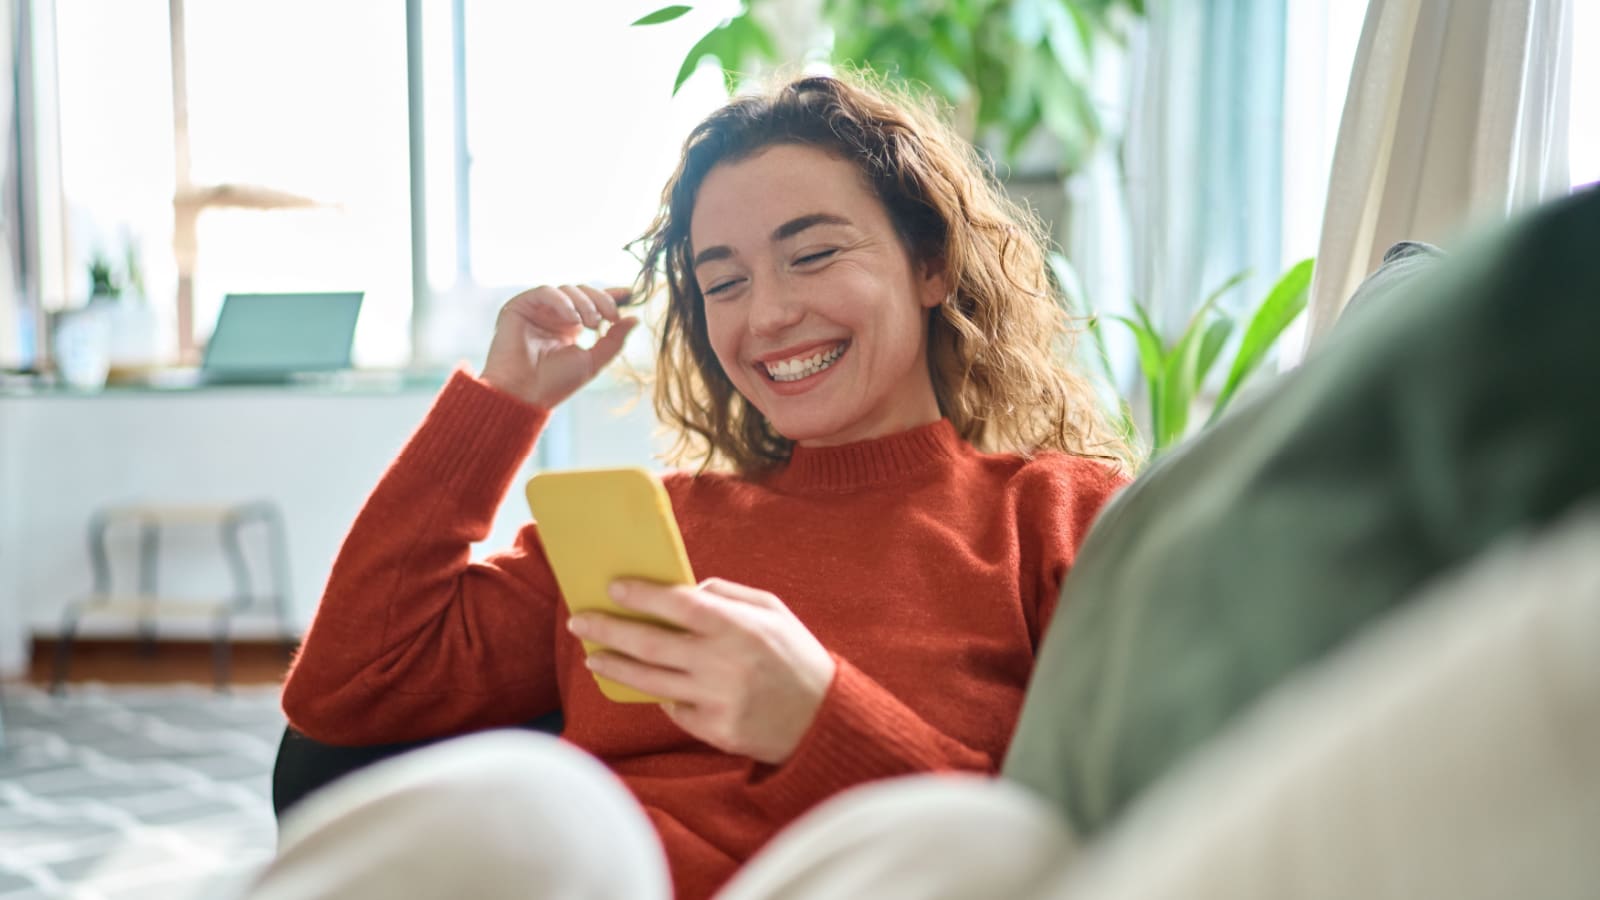 Happy relaxed young woman sitting on couch using cell phone, smiling lady laughing holding smartphone, looking at cellphone enjoying doing online ecommerce shopping in mobile apps or watching